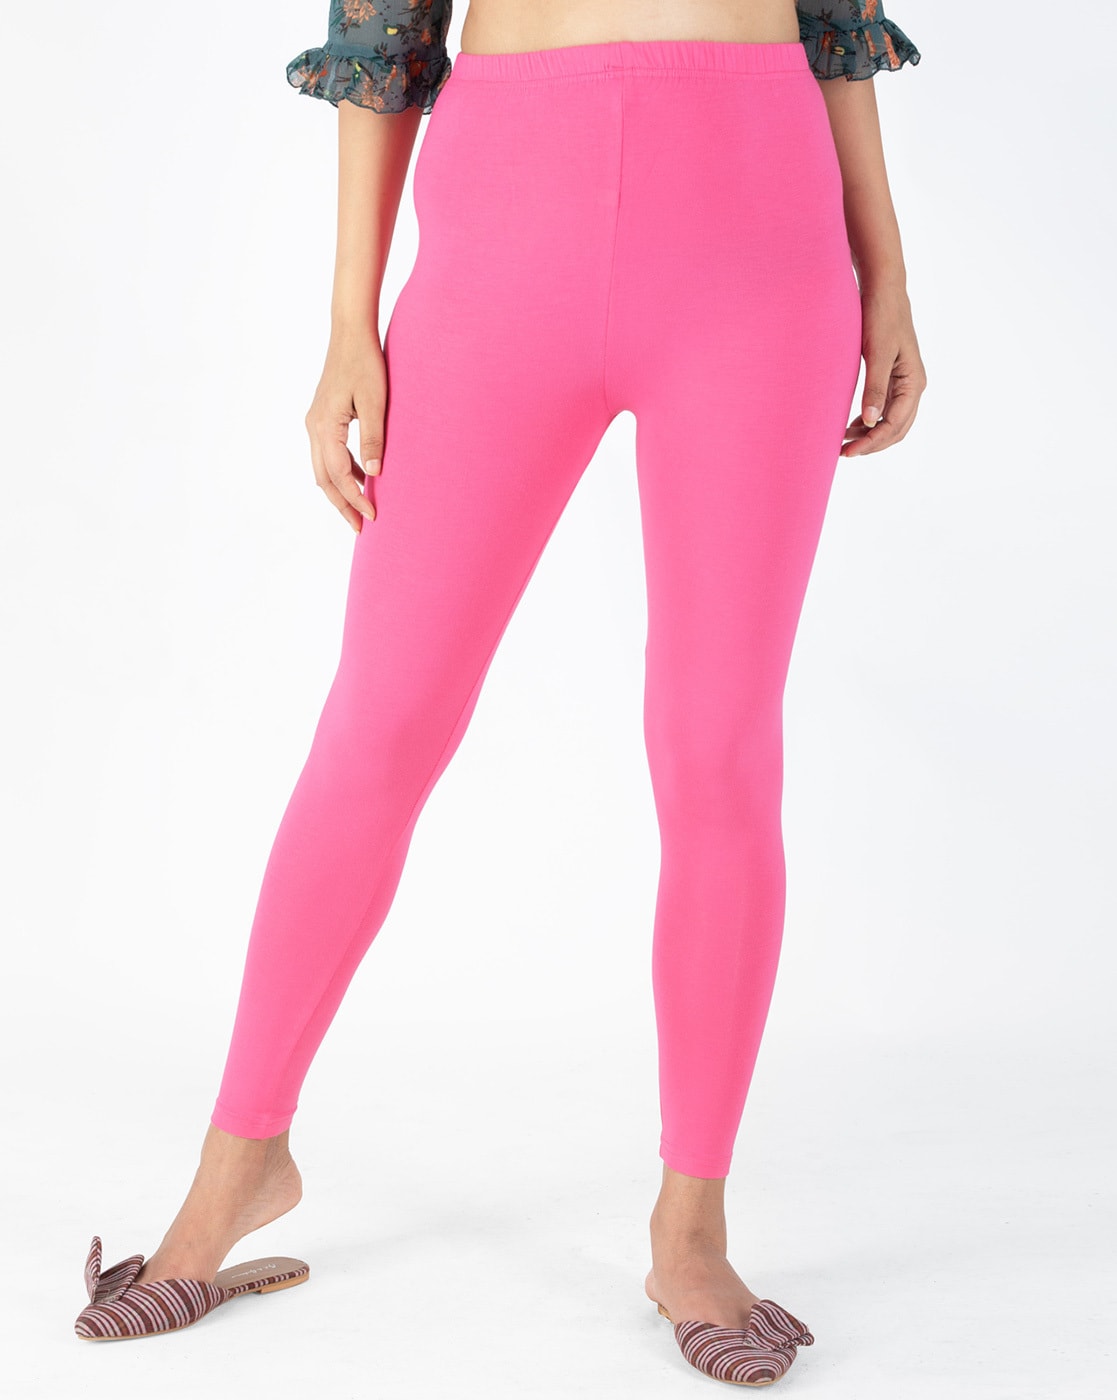 Buy INDIAN FLOWER Women Lycra Solid Turquoise & Pink Legging Online at Low  Prices in India 